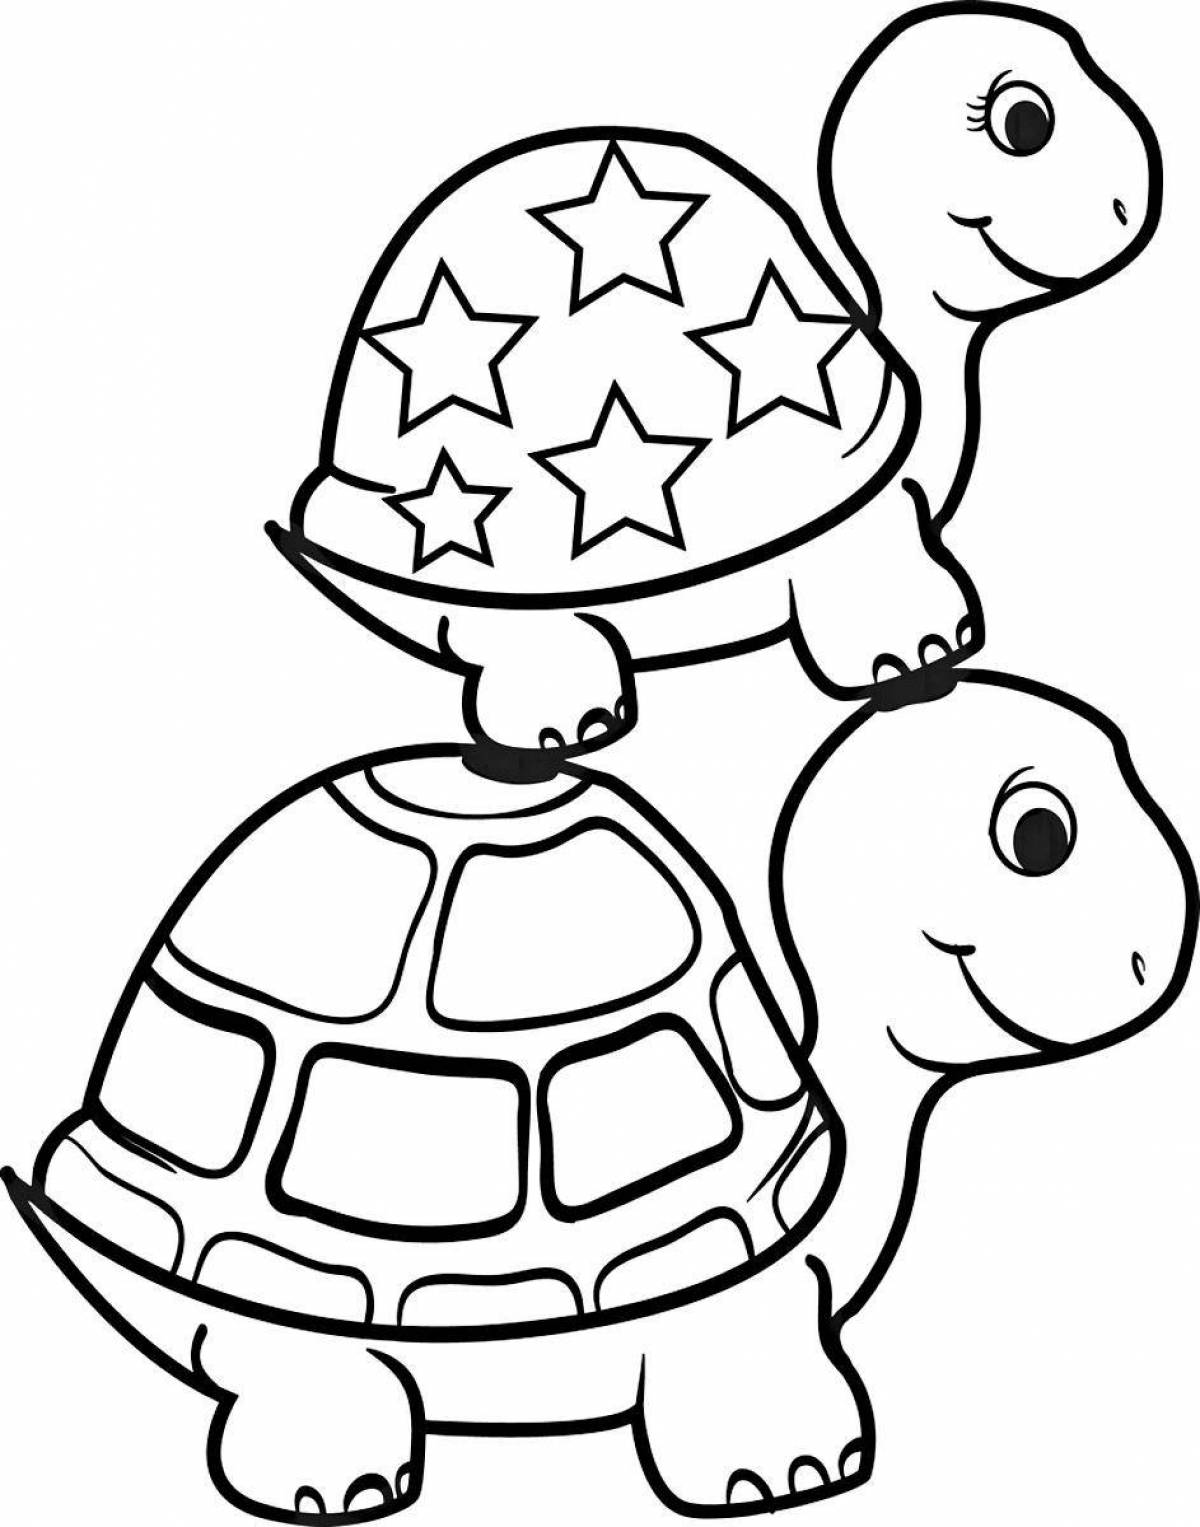 Fairy turtle coloring book for kids